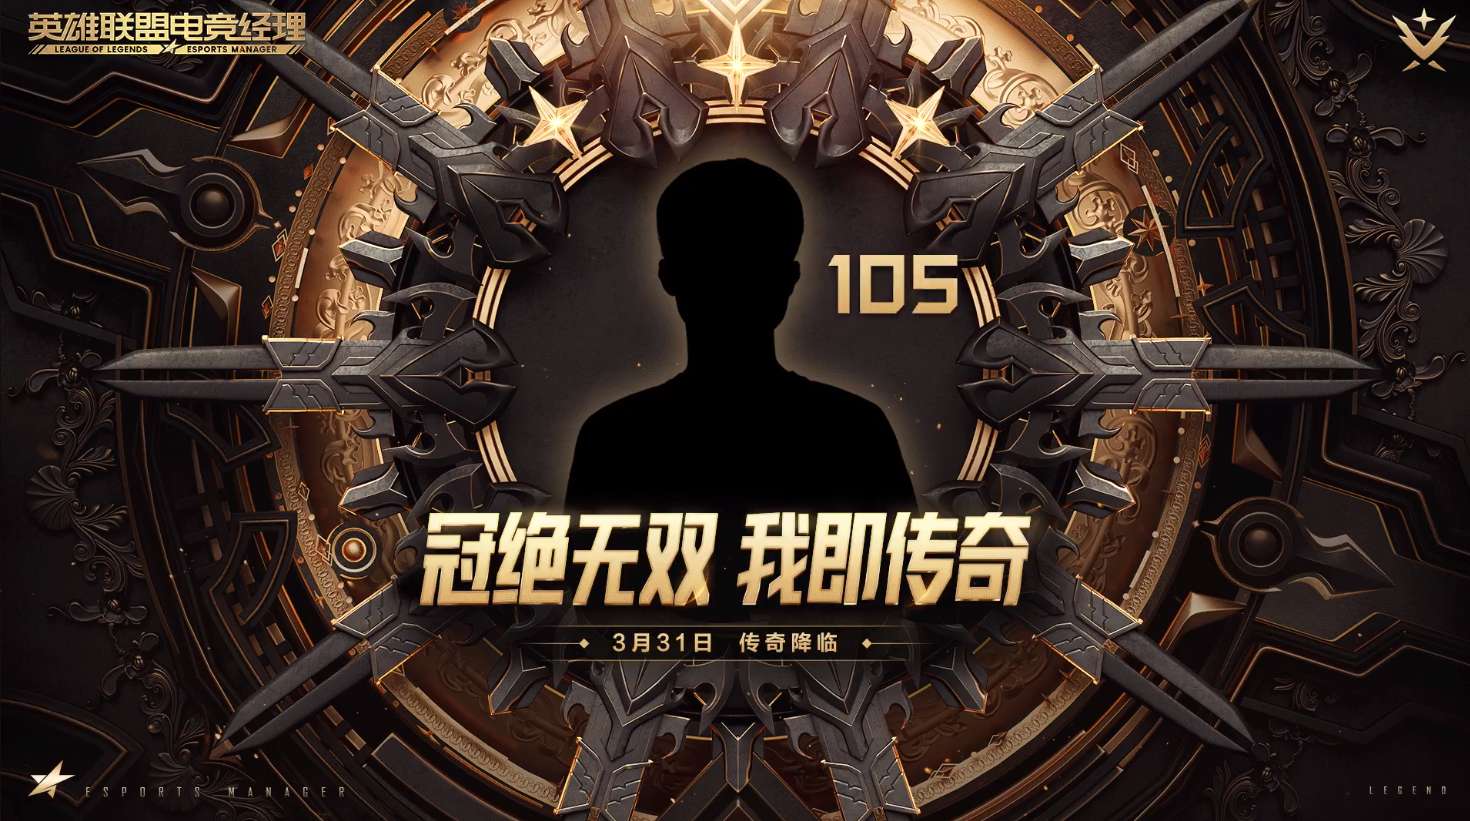 Faker's card is expected to have an index of 105 - the highest index ever in this game.